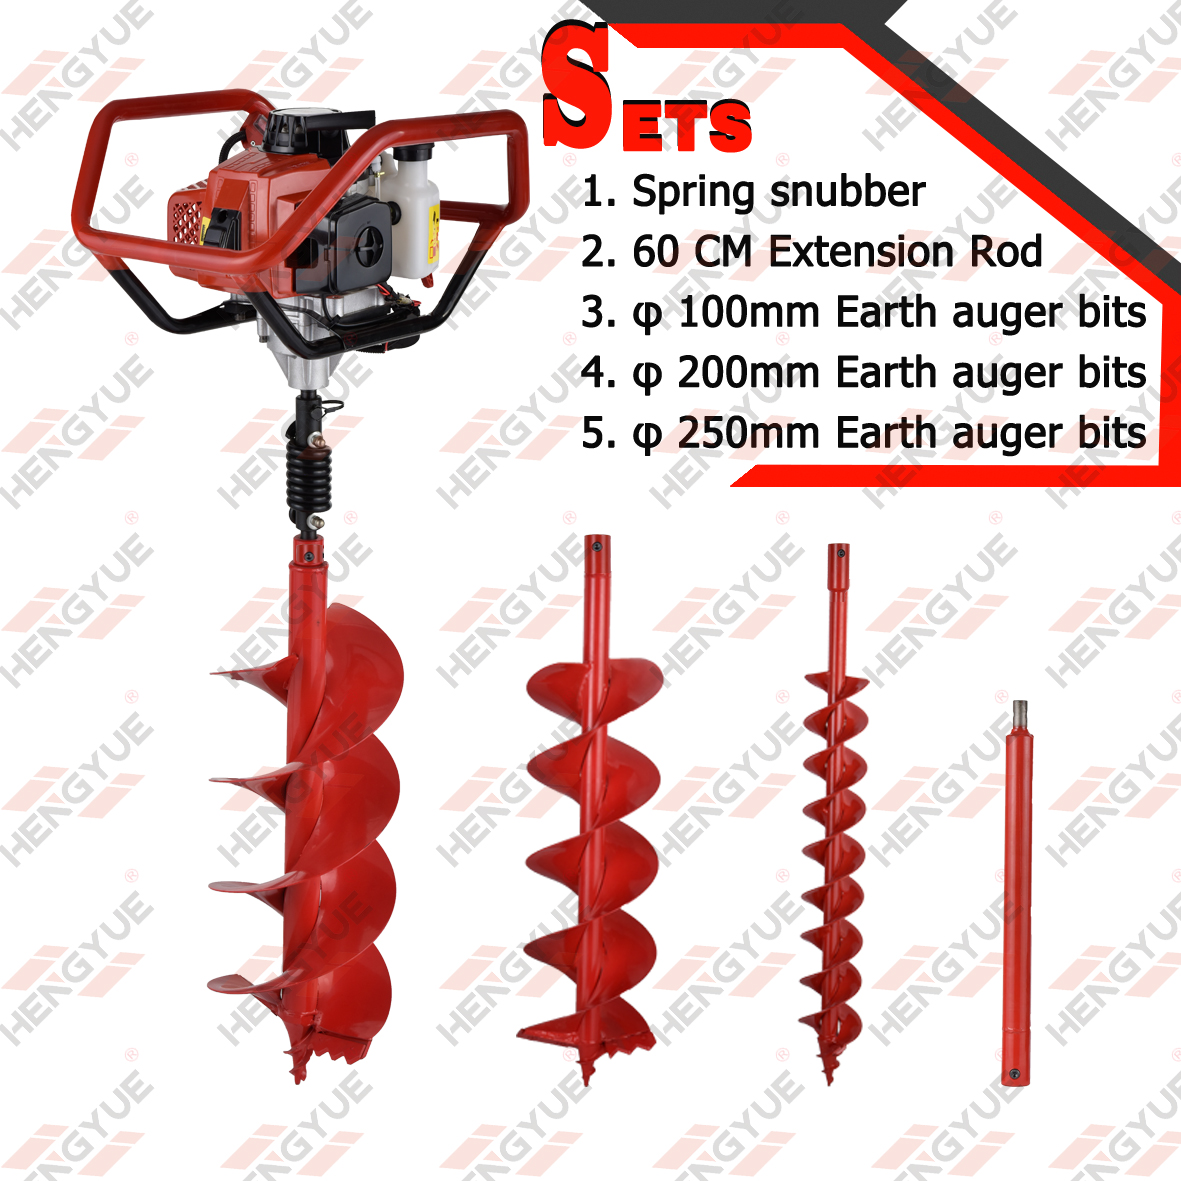 Powered by HONDA engine power 1 or 2 man operate earth auger 